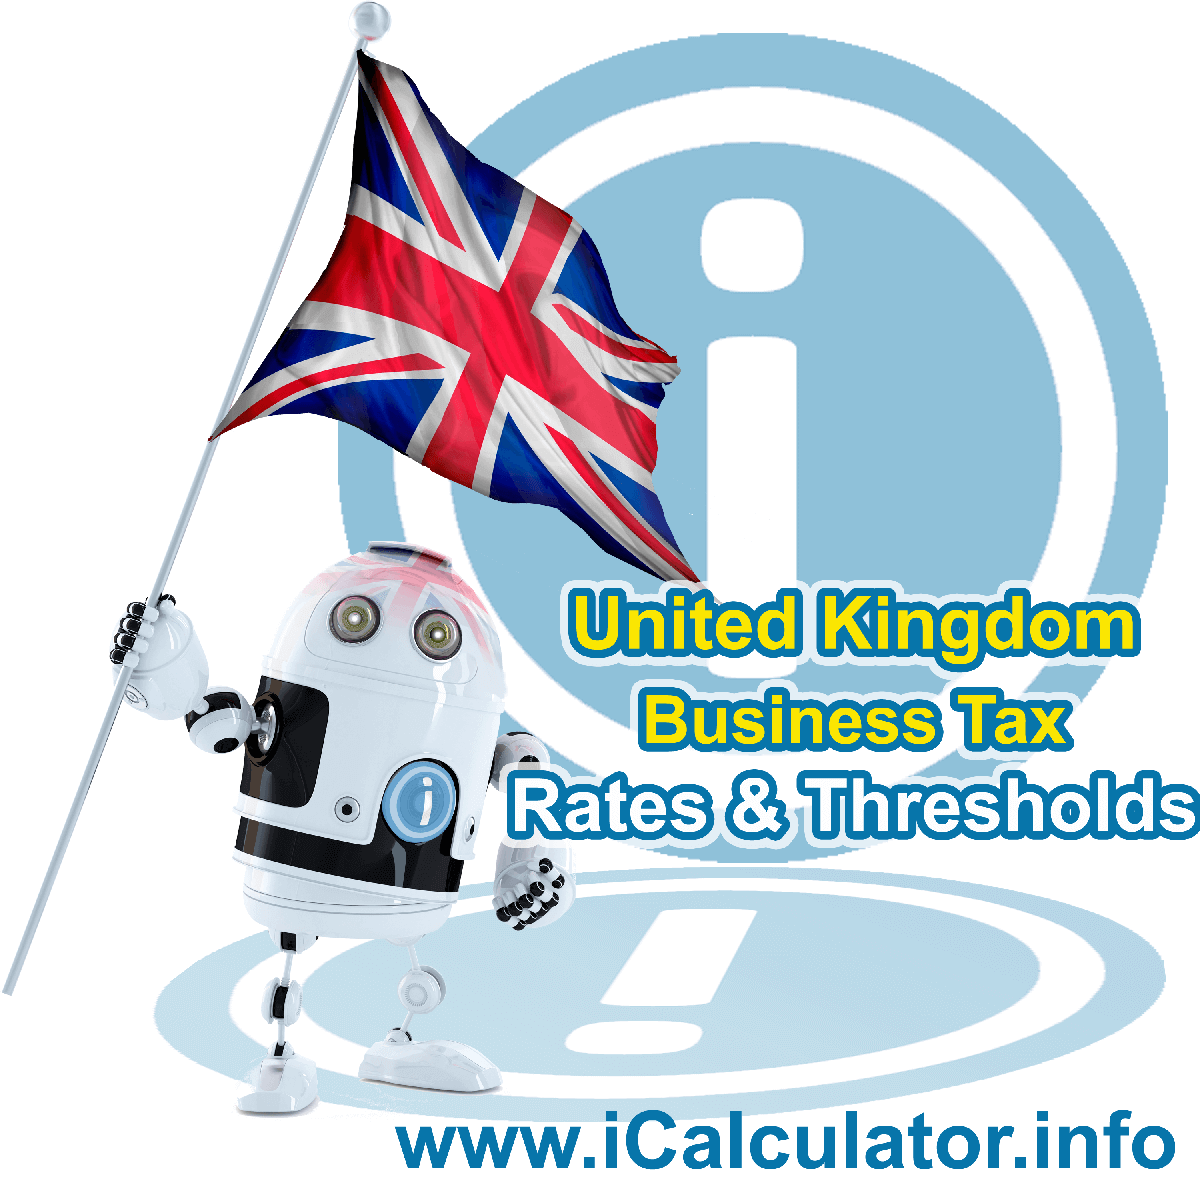 United Kingdom Corporation Tax Rates in 2021. This image shows the United Kingdom flag and information relating to the corporation tax formula for the United Kingdom Corporation Tax Calculator in 2021